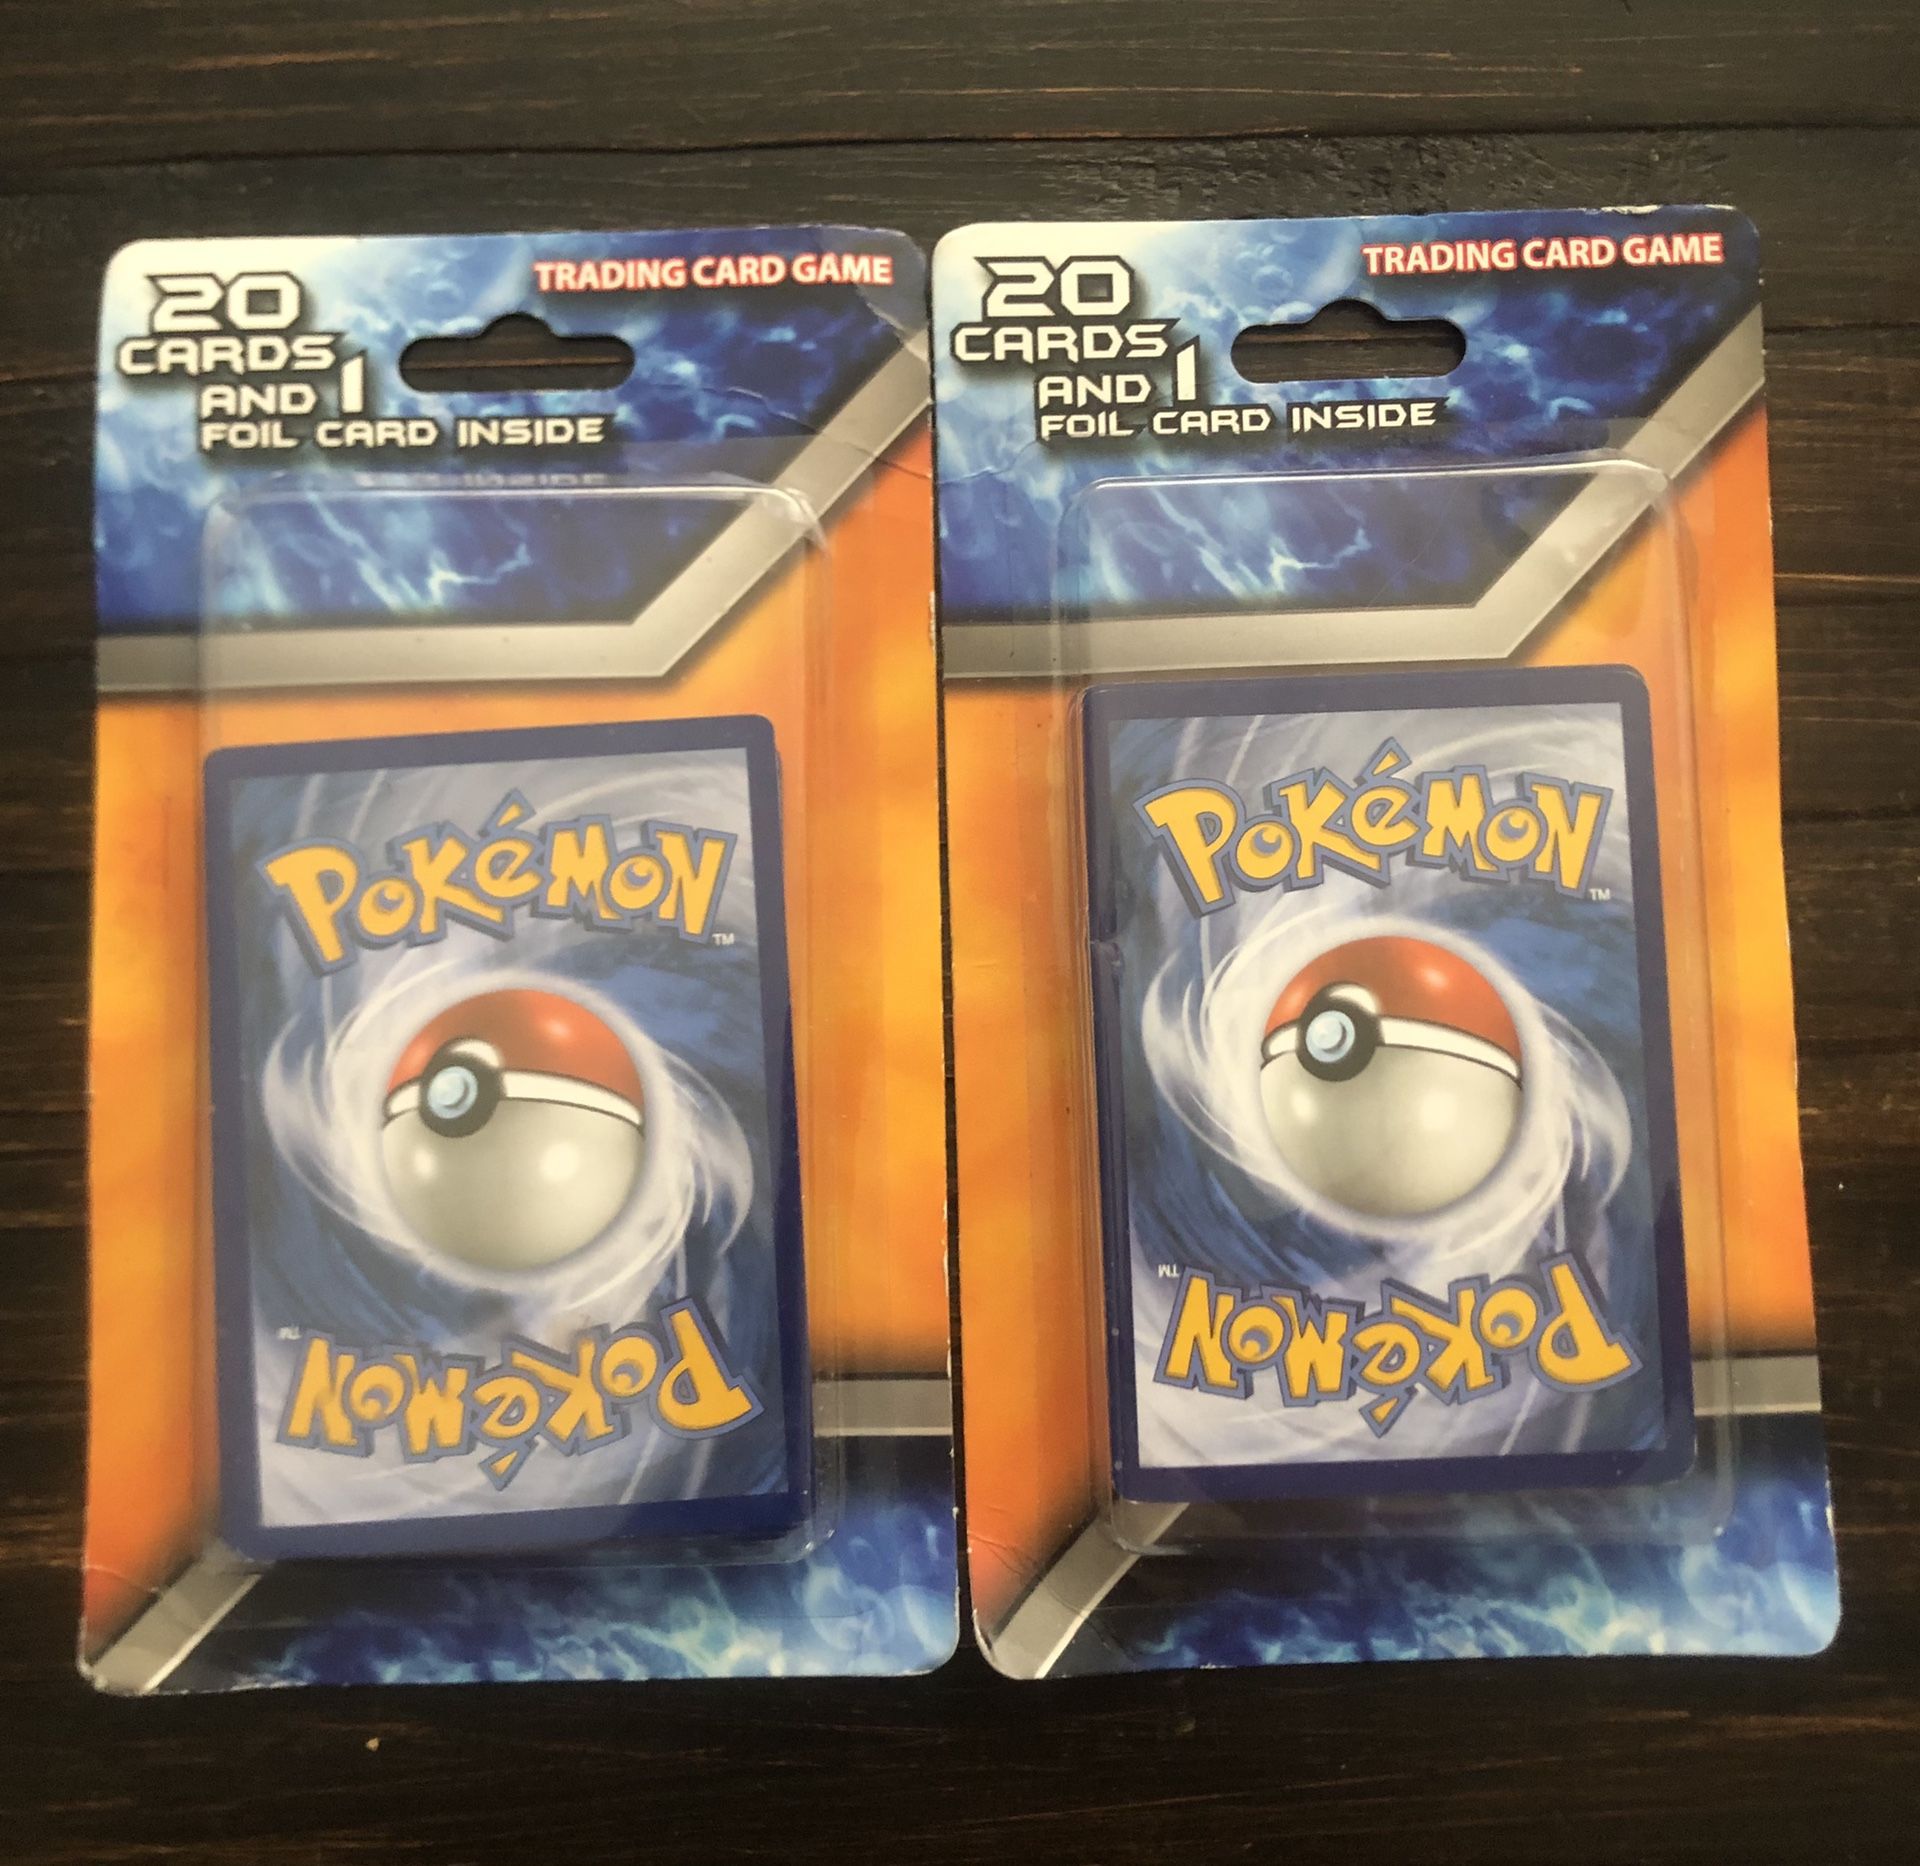 Pokemon Trading Cards Include 20 cards each pack